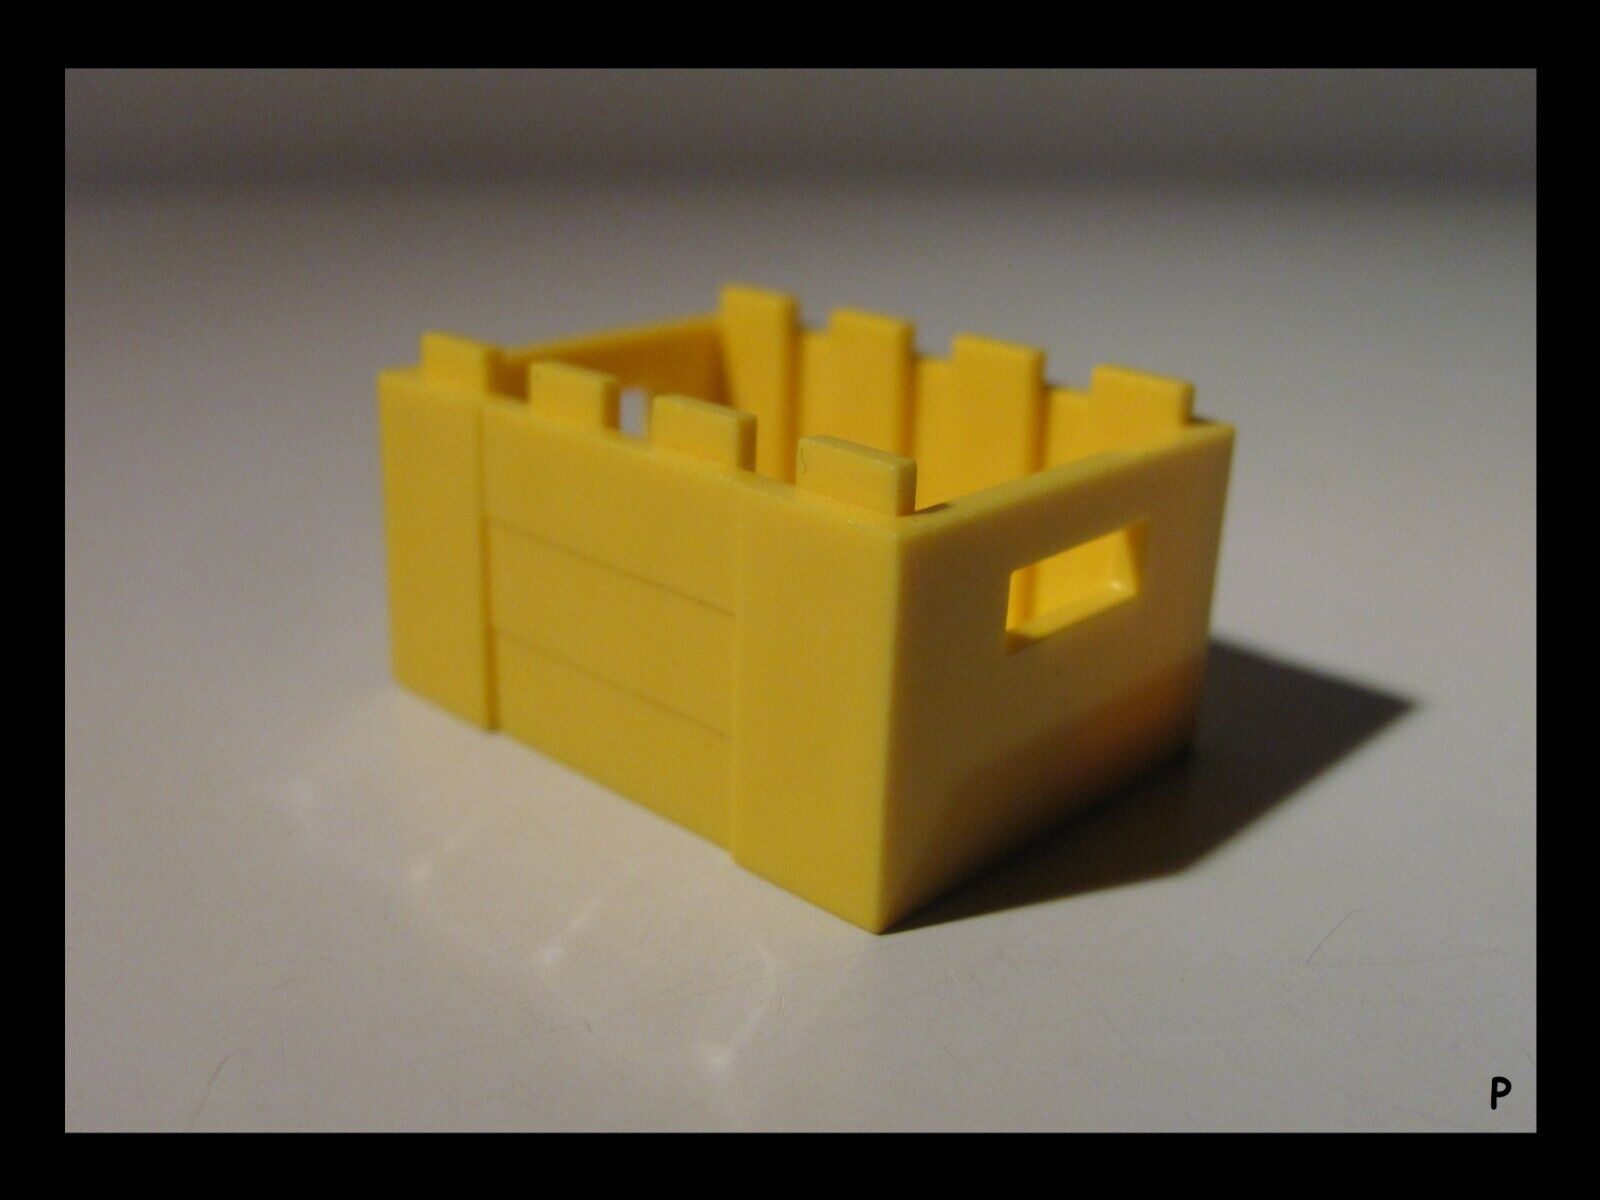 LEGO : Yellow Crate Container Box / 21310 41701 60262 75151 75092 ( 30150 )